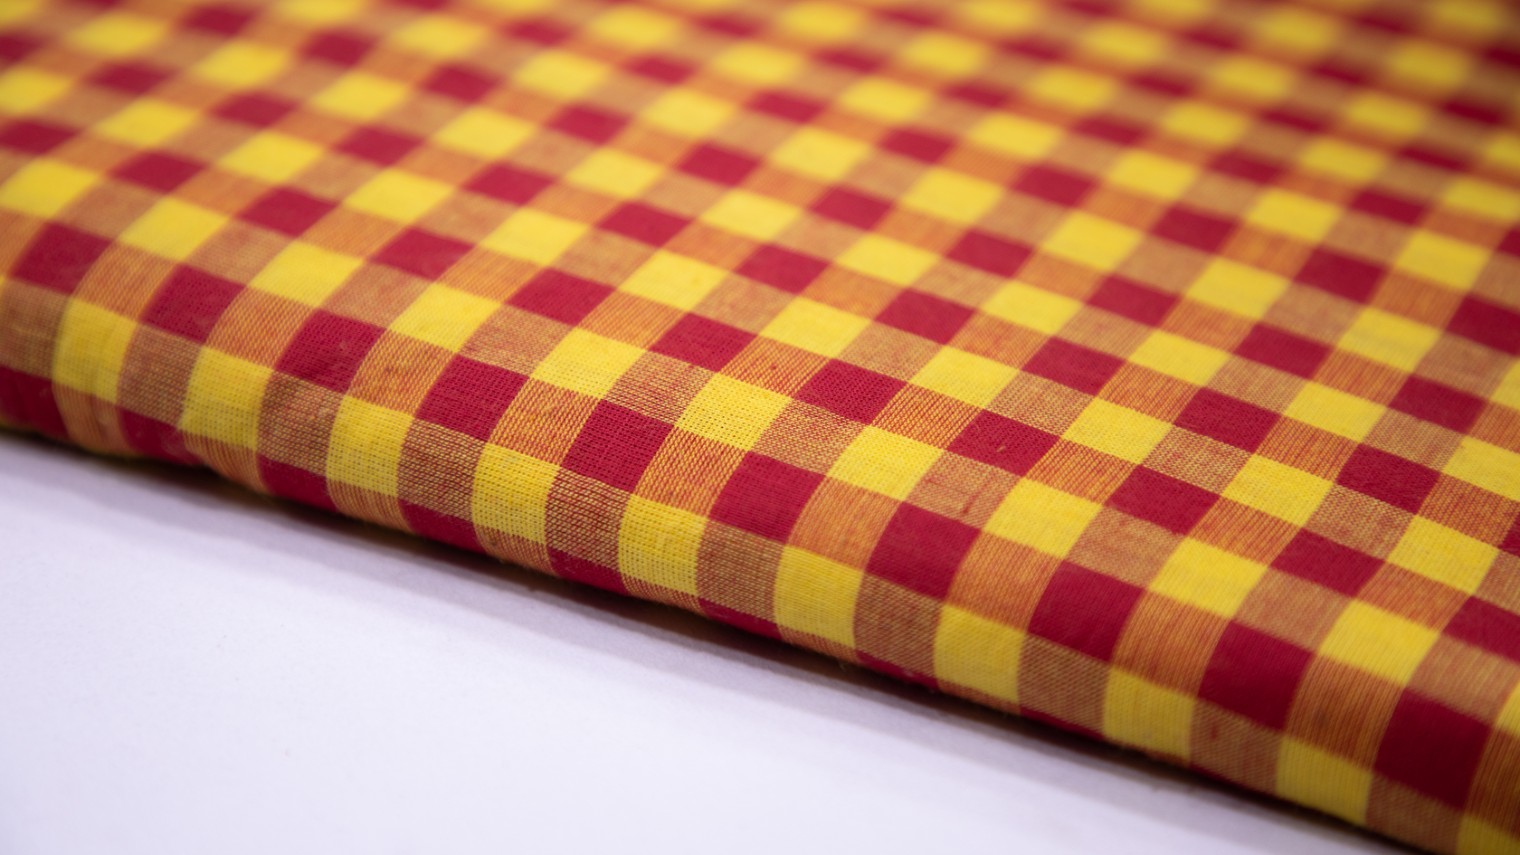 Bright Yellow & Red Color South Cotton Handloom Criss Cross Chex Weave Pattern Fabric - 4218